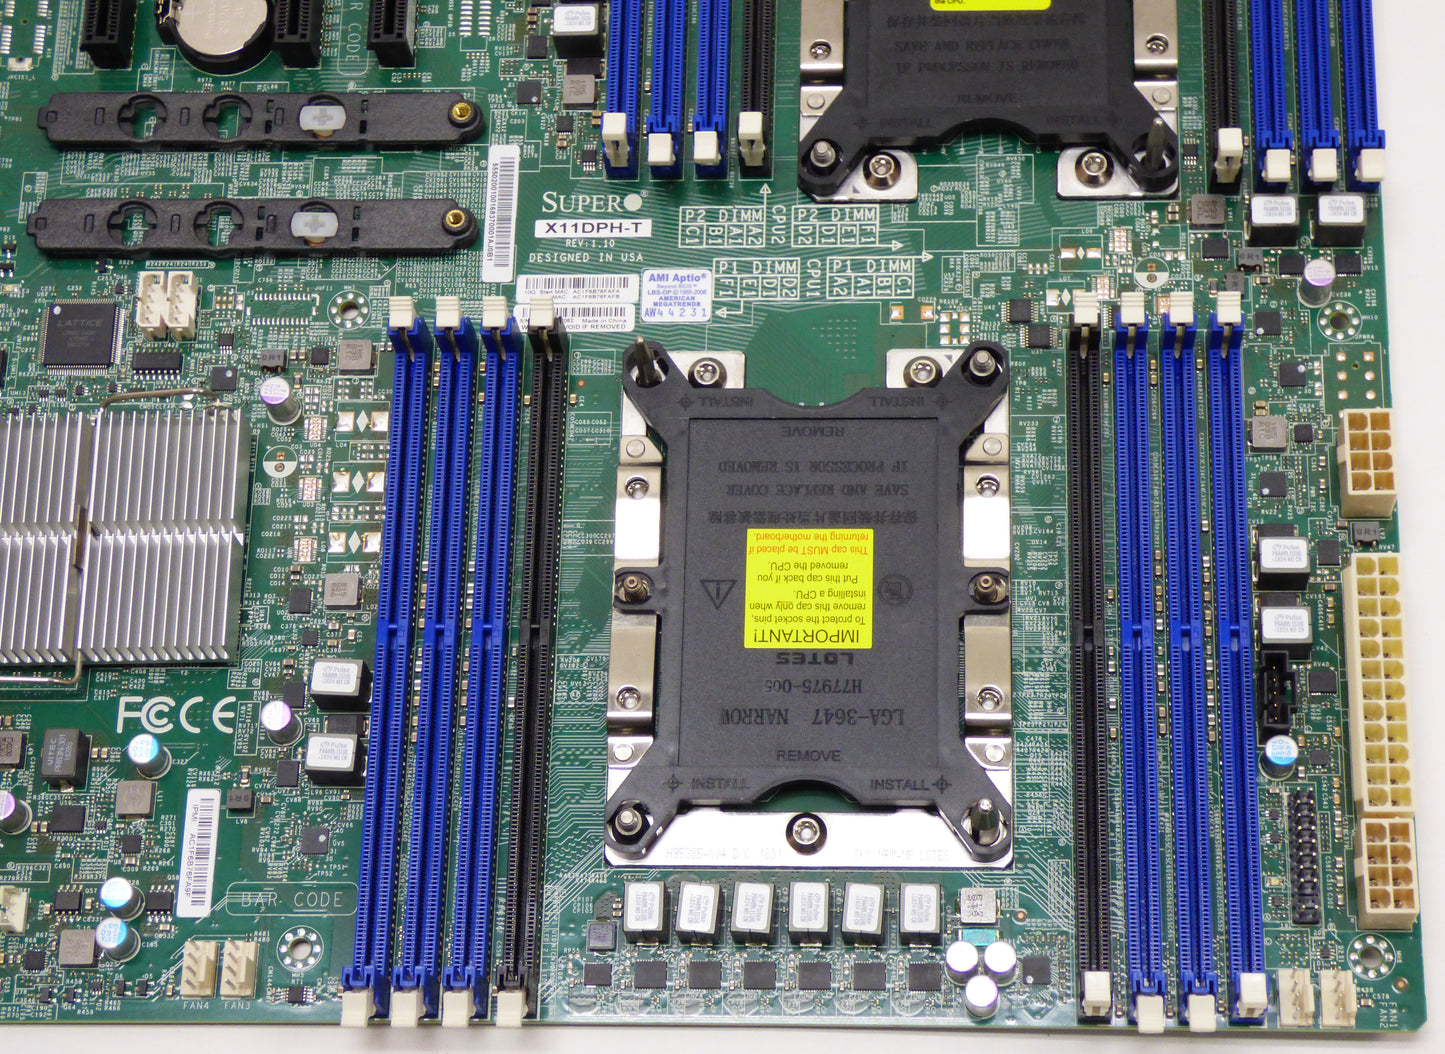 supermicro x11dph-t cpu 1 and dimm slots